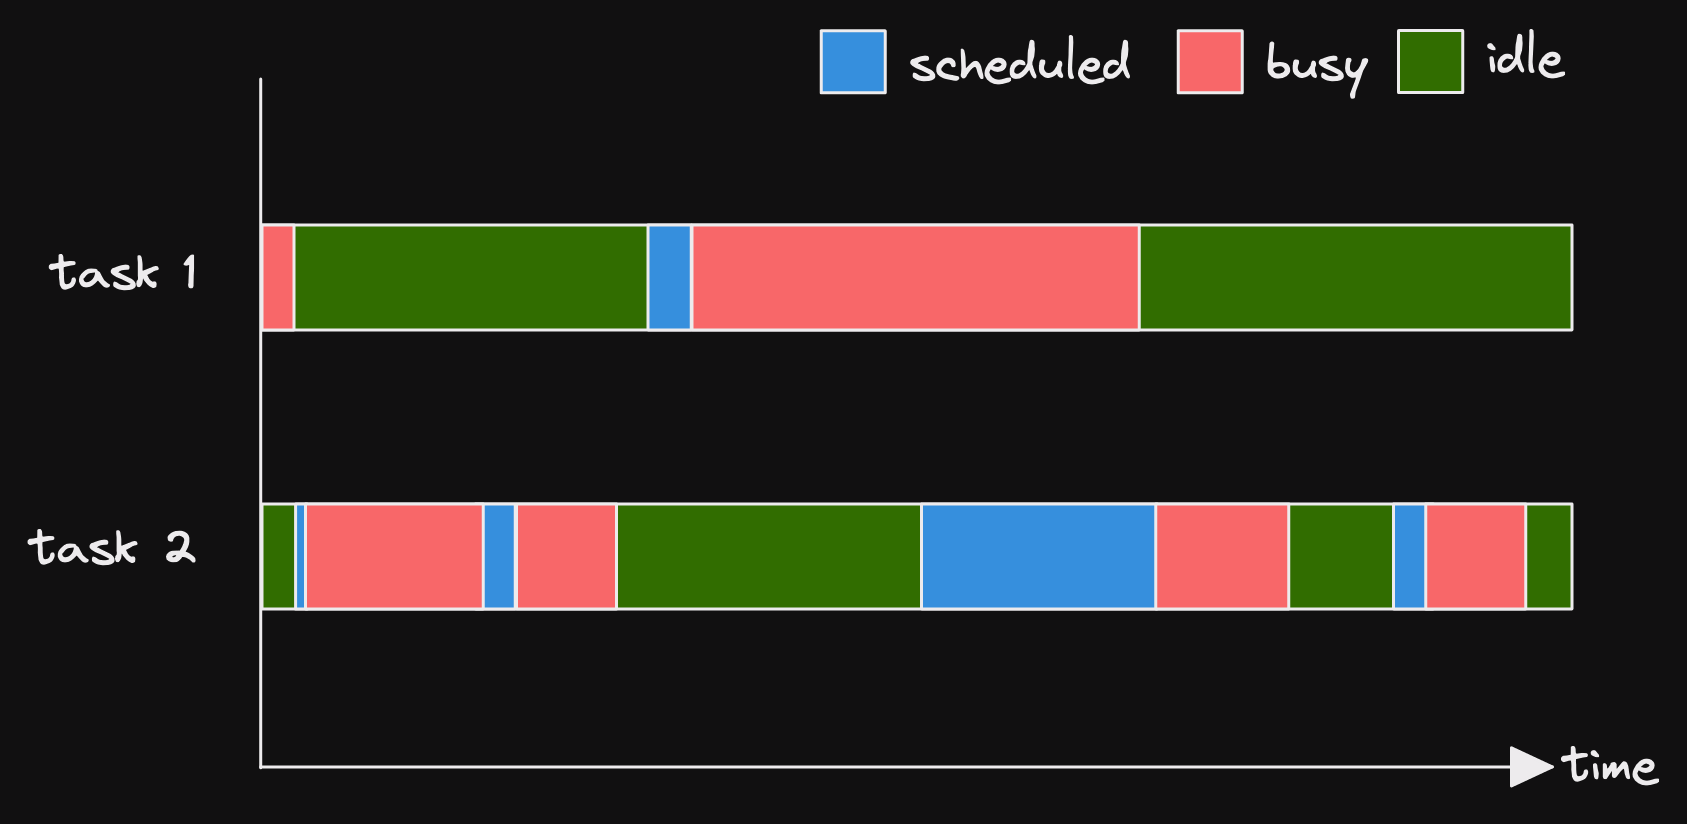 Time-status diagram showing 2 tasks, each in one of 3 states: idle, scheduled, busy. There is no point at where both tasks are busy at the same time. There is one moment when task 1 is busy for a long time and during part of that time, task 2 is scheduled for longer than usual.